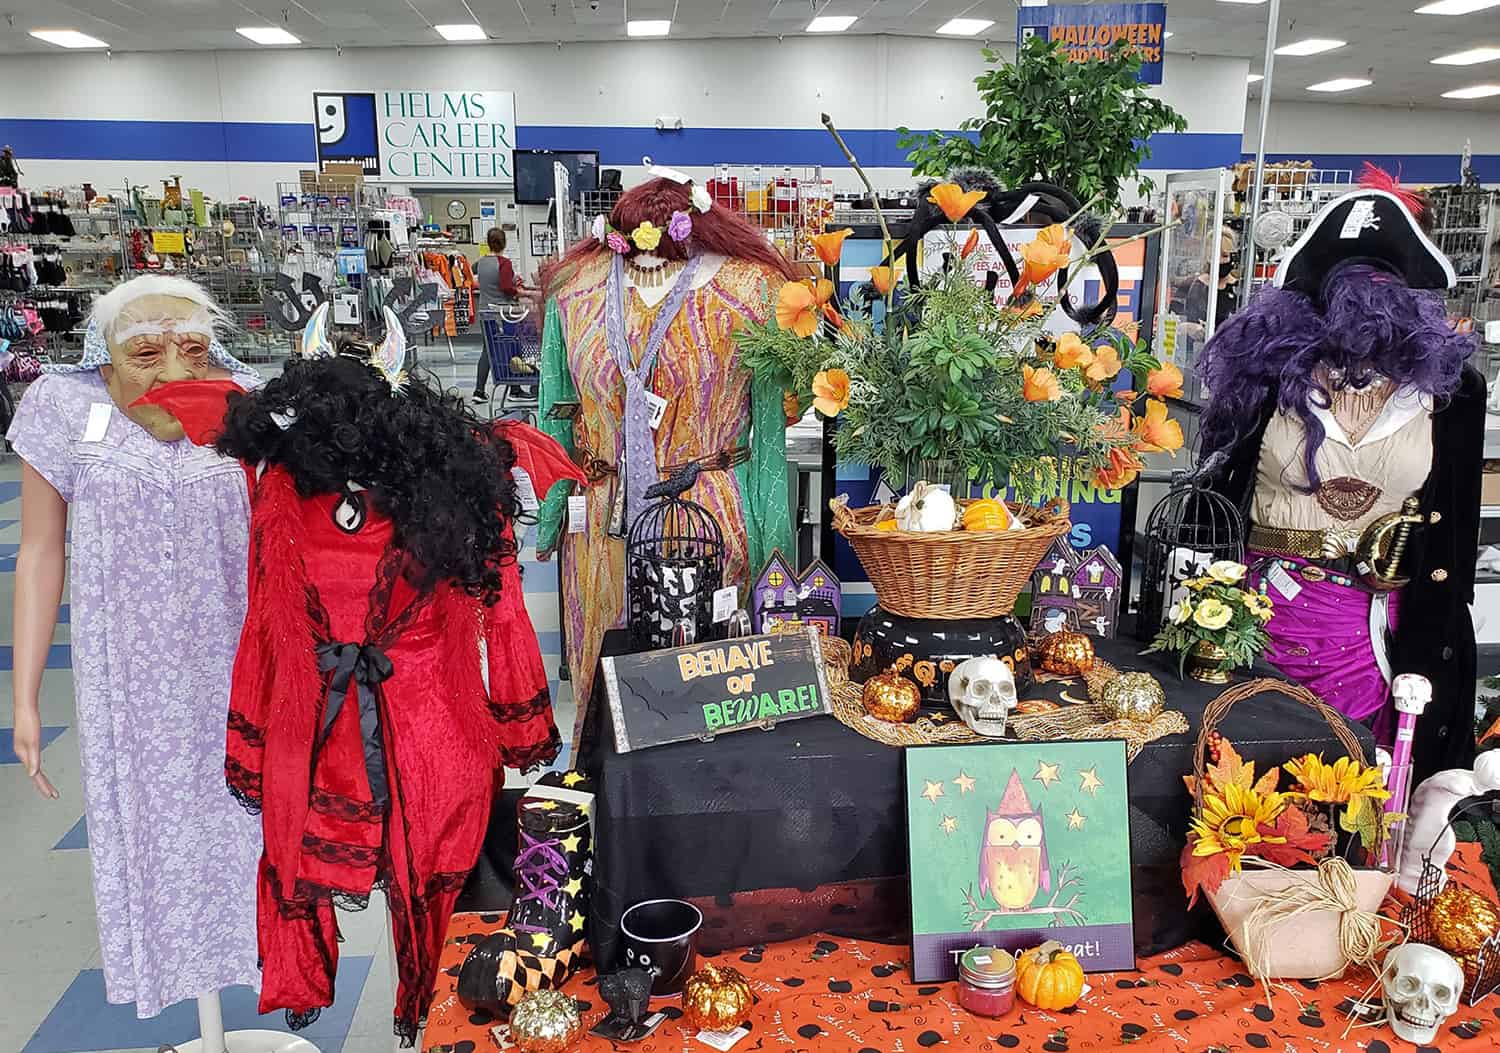 The Top 5 Reasons Halloween Starts at Goodwill Goodwill of the Heartland